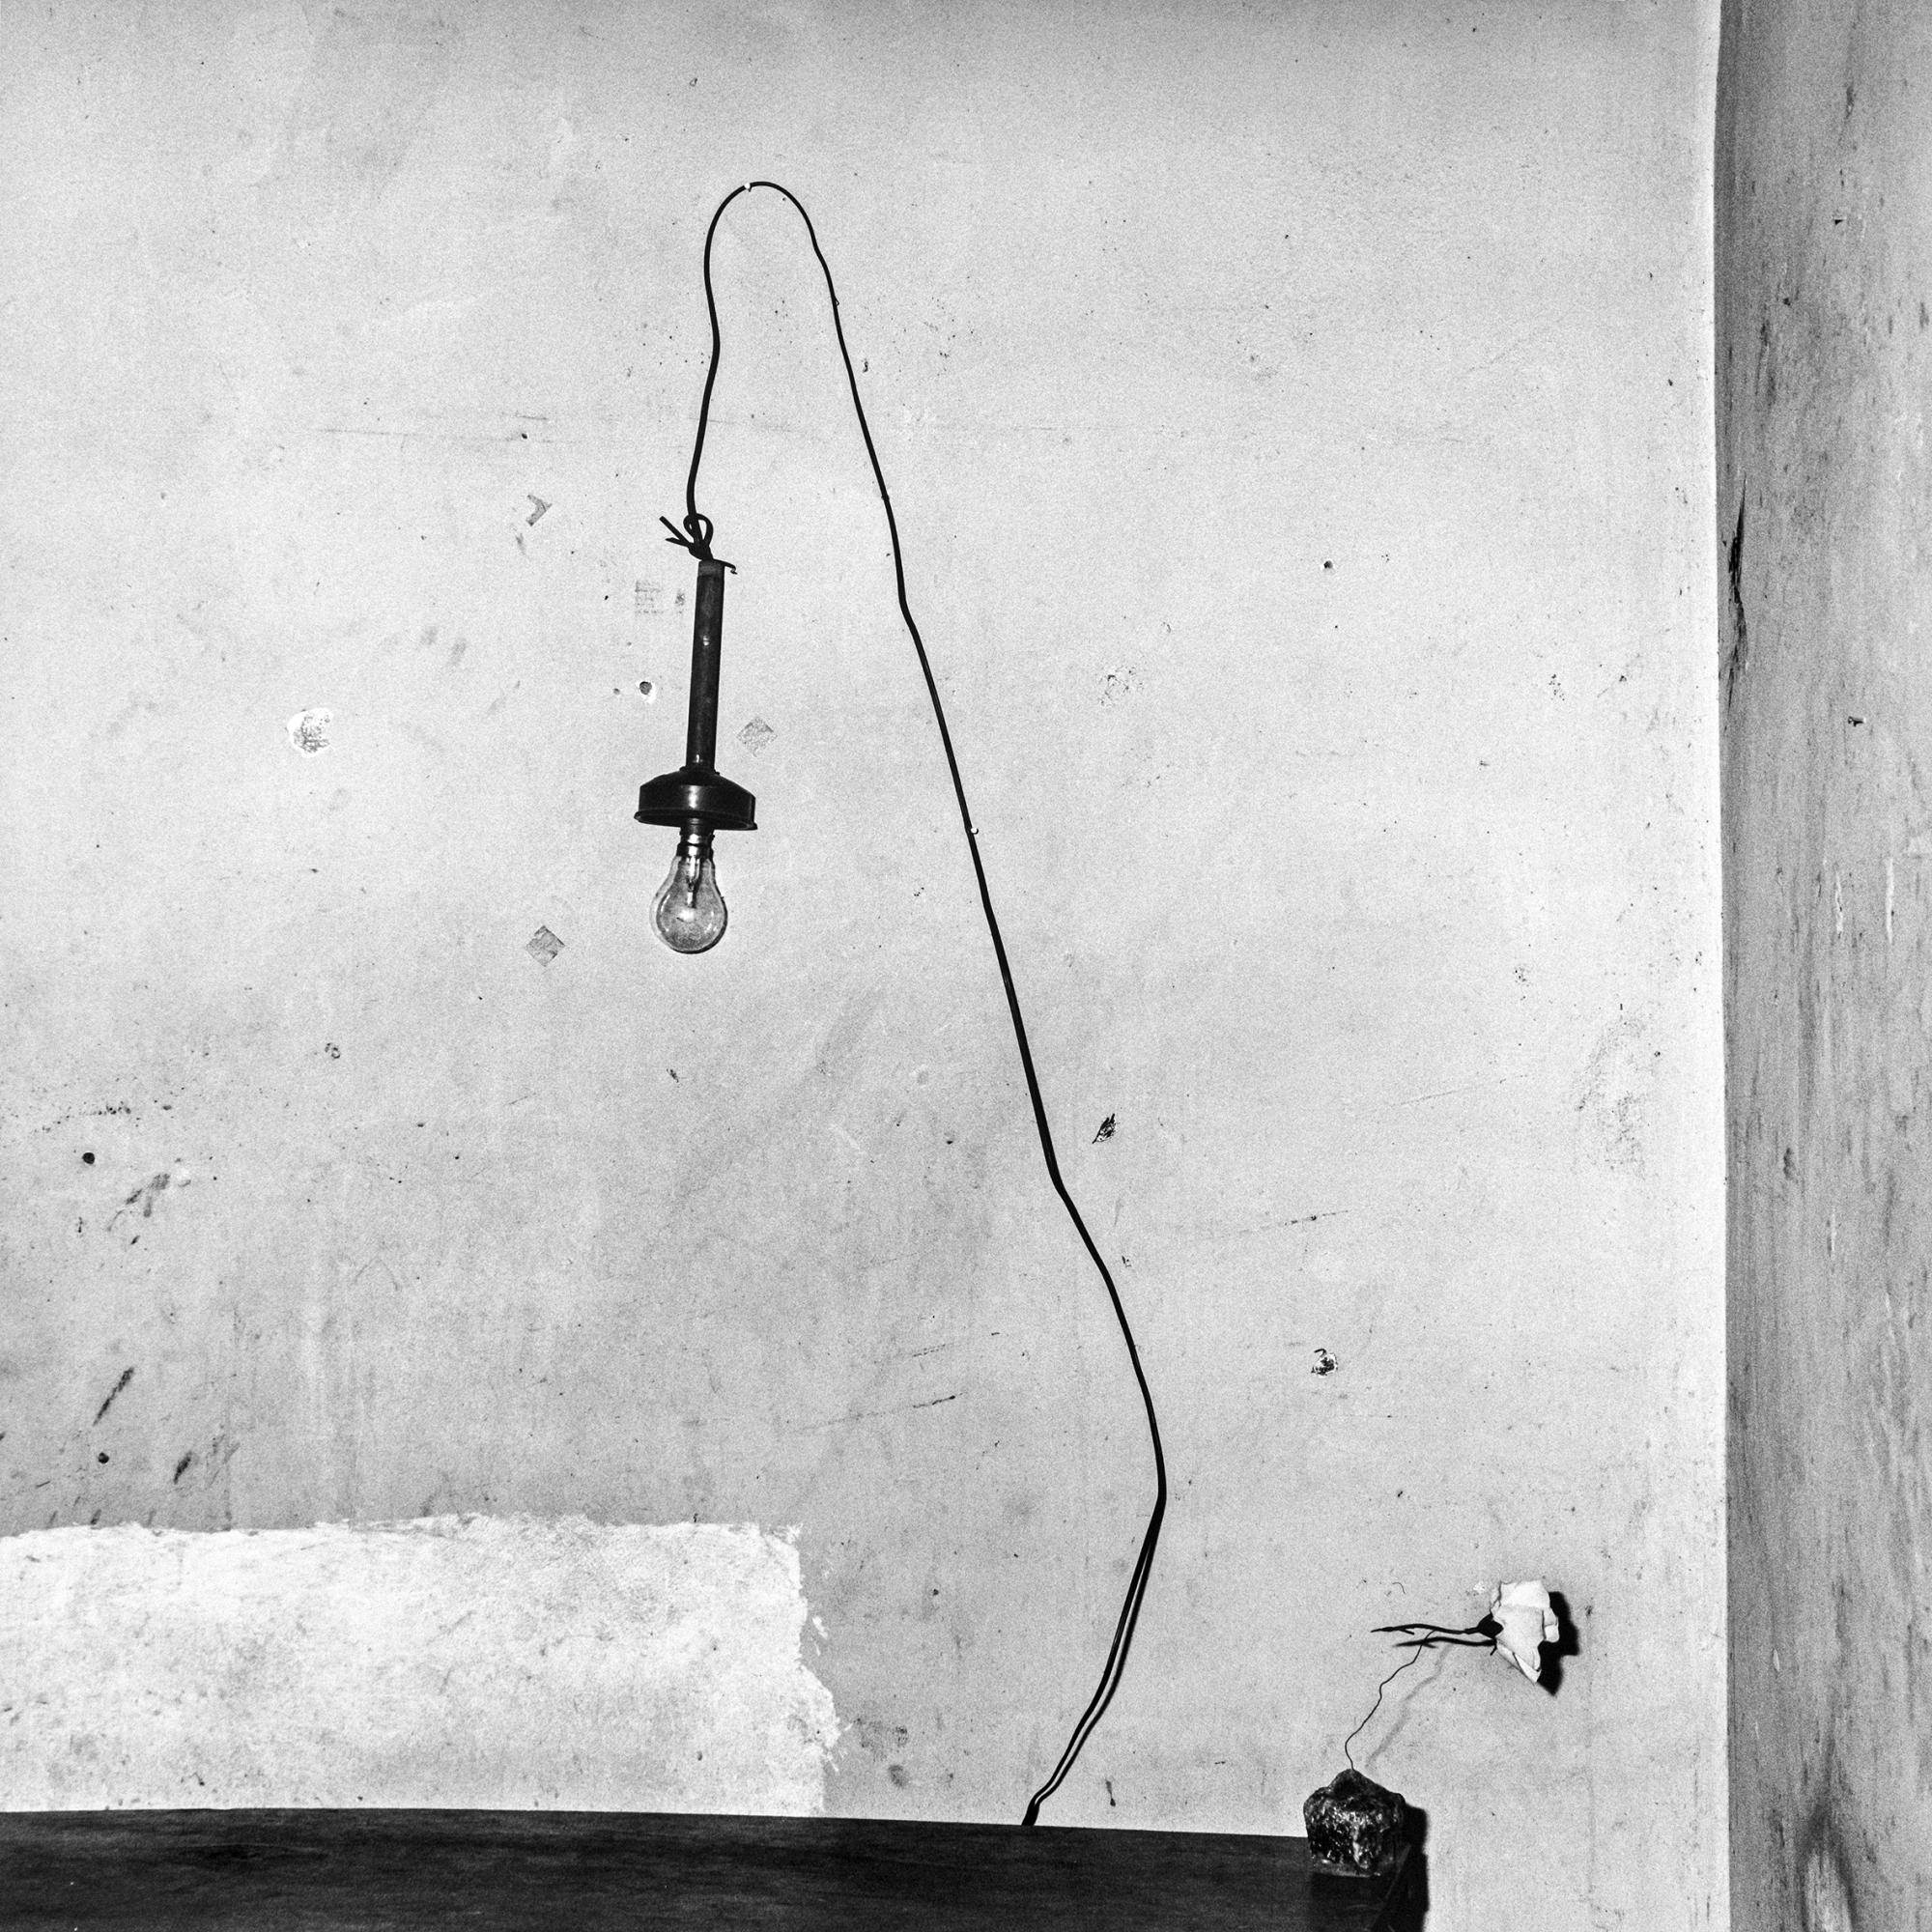 Roger BALLEN
Abandoned Flower, 2001
Vintage silver gelatin print
Image 36 x 36 cm (14 1/8 x 14 1/8 in.)
Sheet 40 x 40 cm (15 3/4 x 15 3/4 in.)
Edition of 10 (#5/10)
Signed and dated verso in pencil
Print only

Christophe Guye Galerie offers a